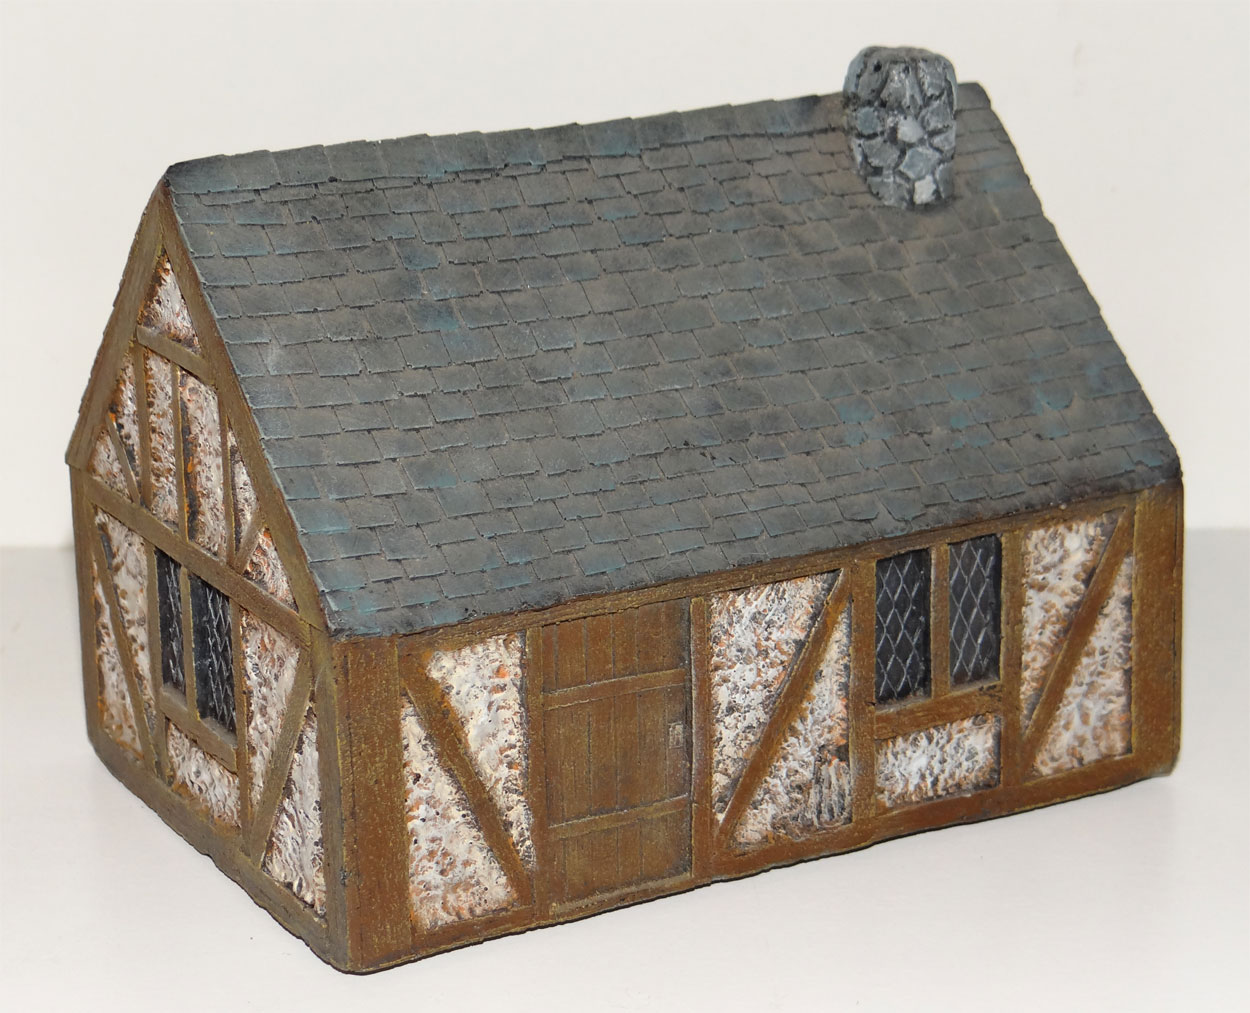 Tile Roofed House